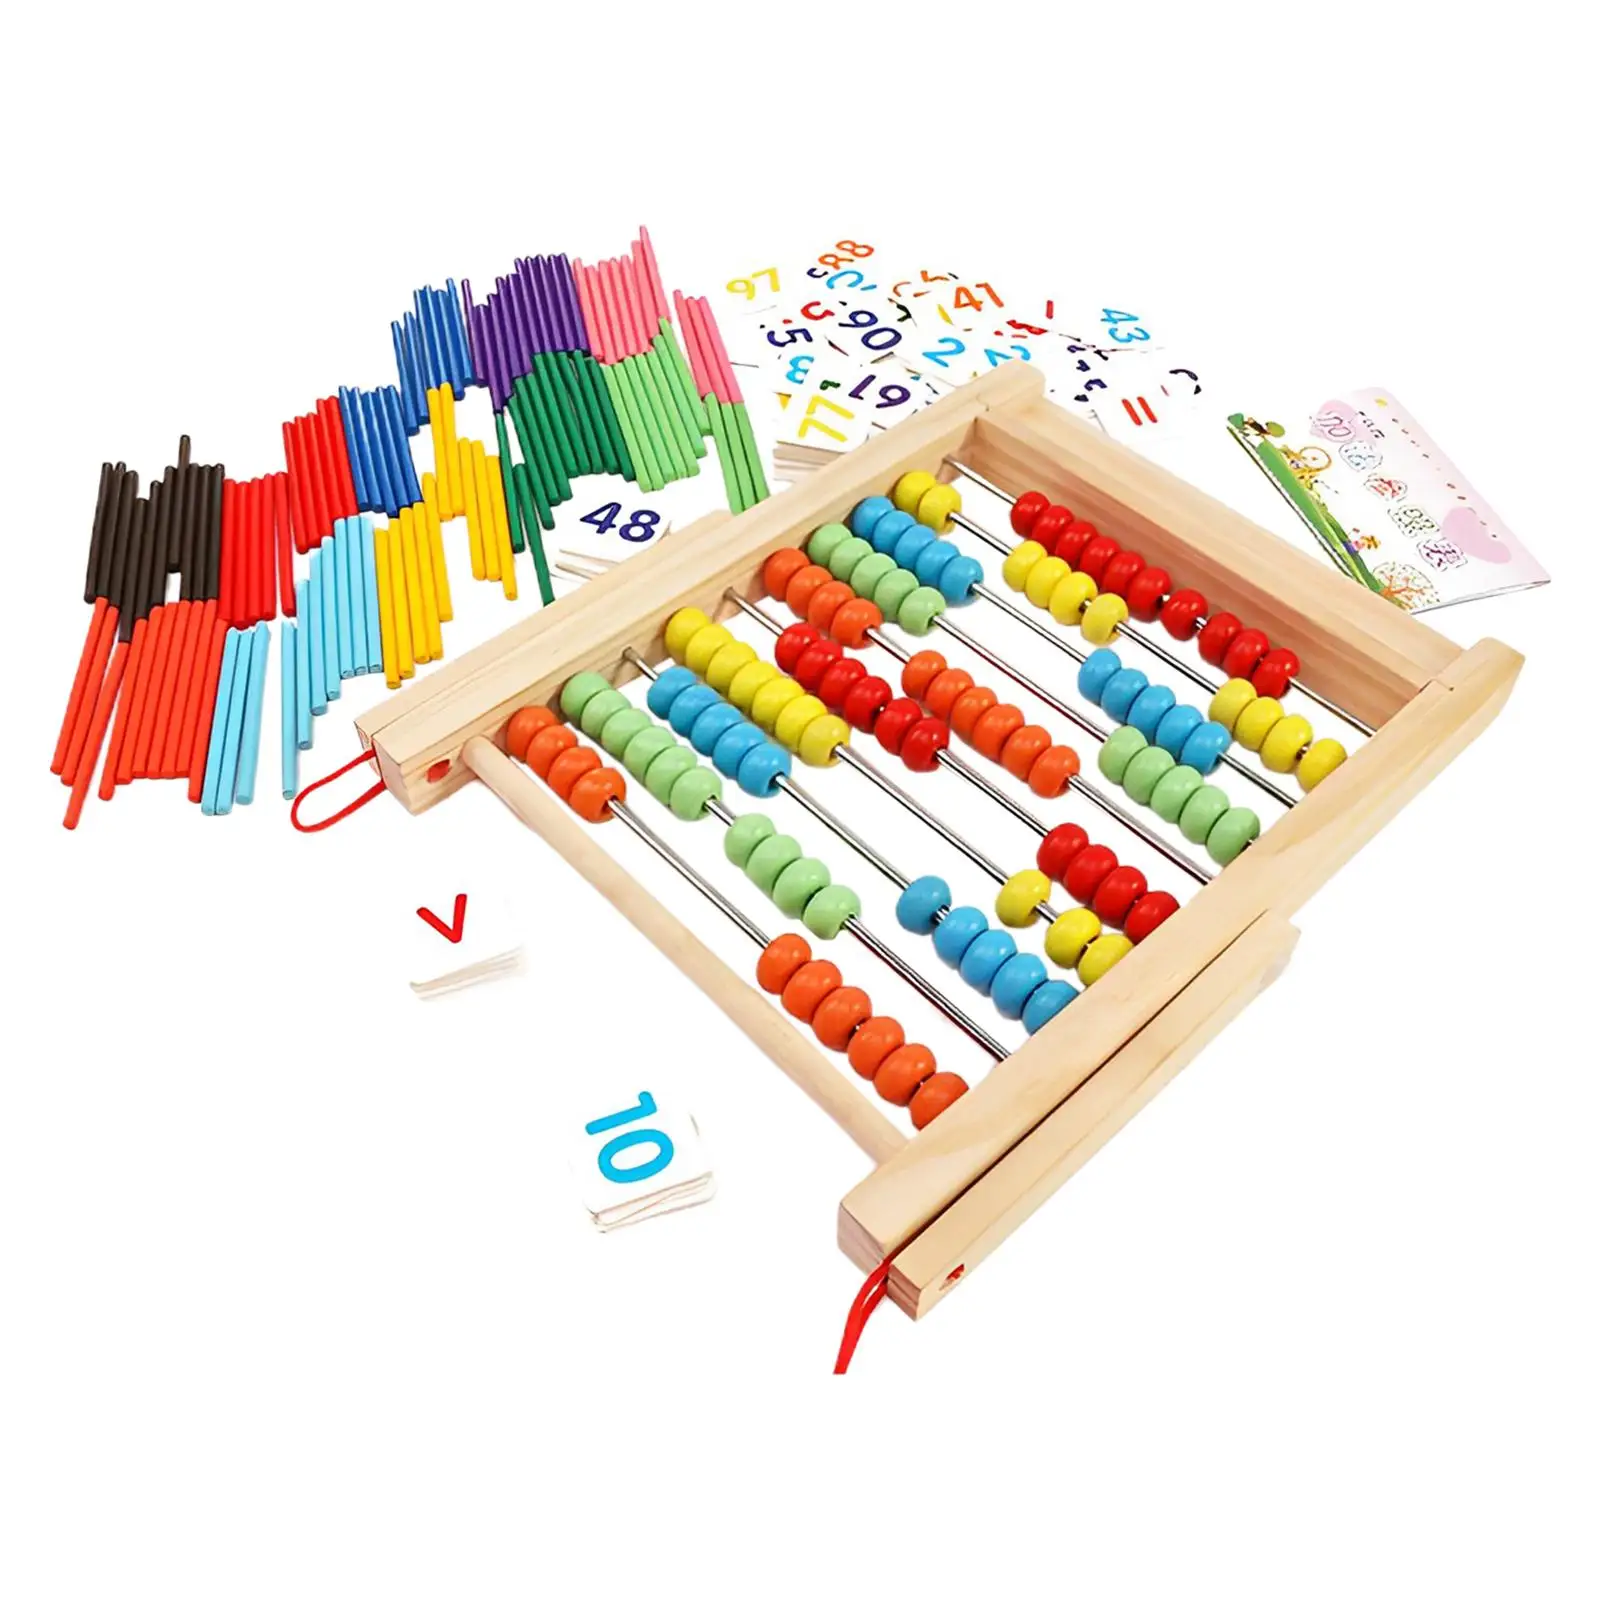 

Add Subtract Abacus Counting Sticks Montessori Educational Counting Frames Toy for Kids Preschool Children Elementary Boys Girls